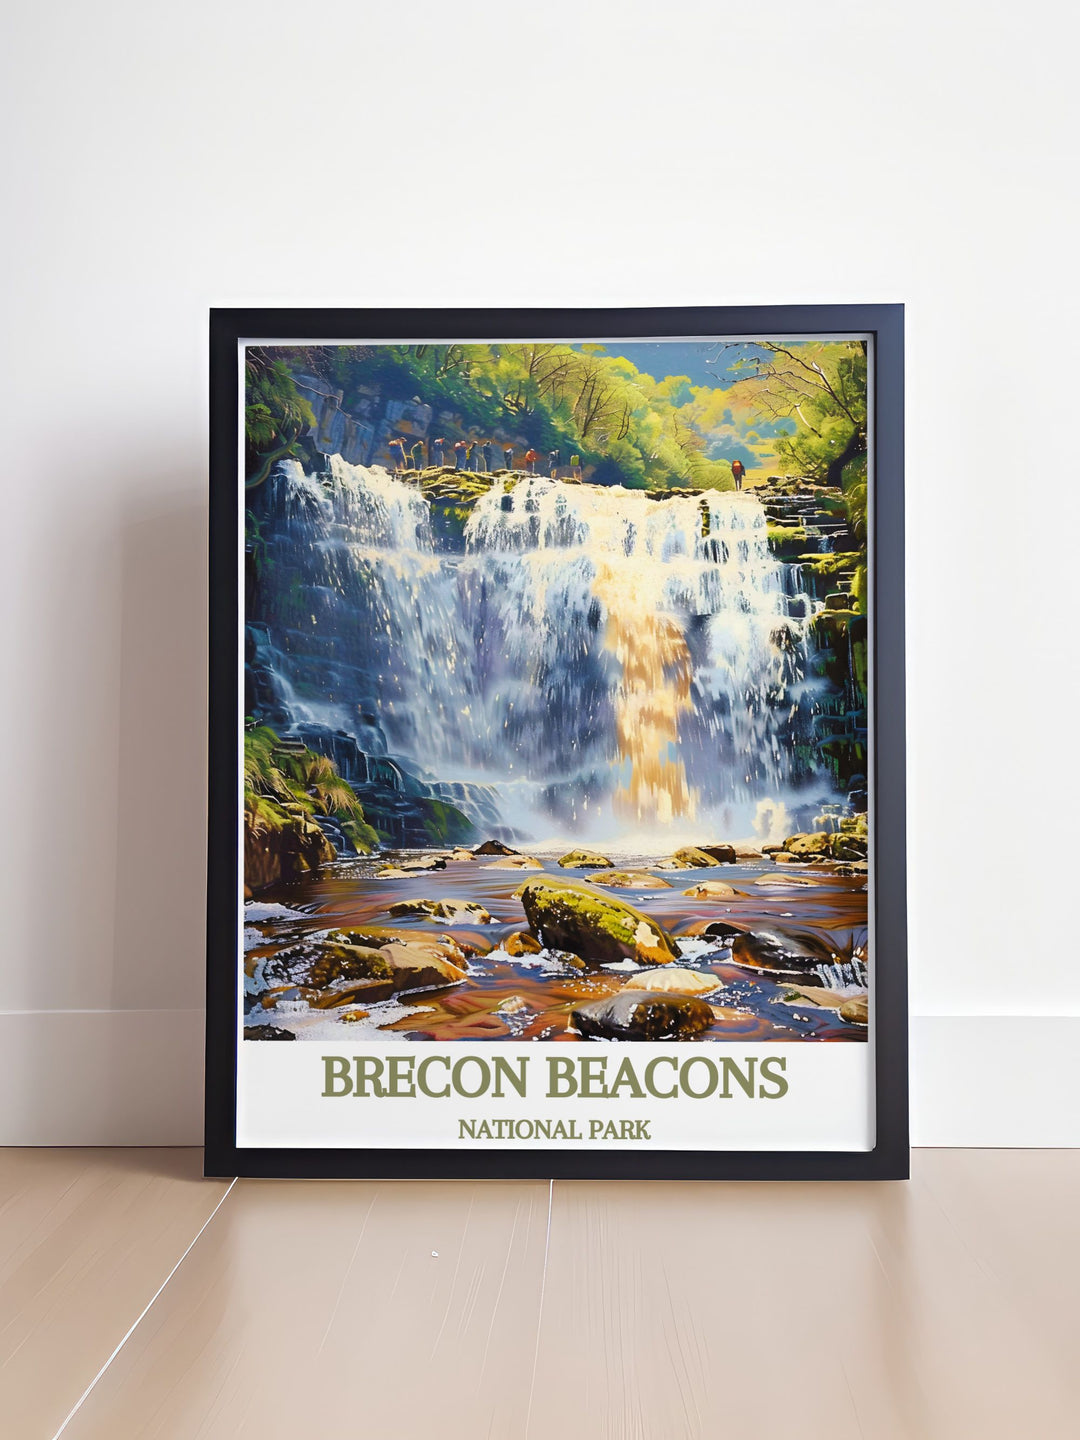 Beautiful print of Sgwd yr Eira in the Brecon Beacons, highlighting the dynamic flow of the waterfall amidst vibrant foliage. This artwork captures the essence of South Wales landscapes, making it a perfect addition to any nature lovers collection.